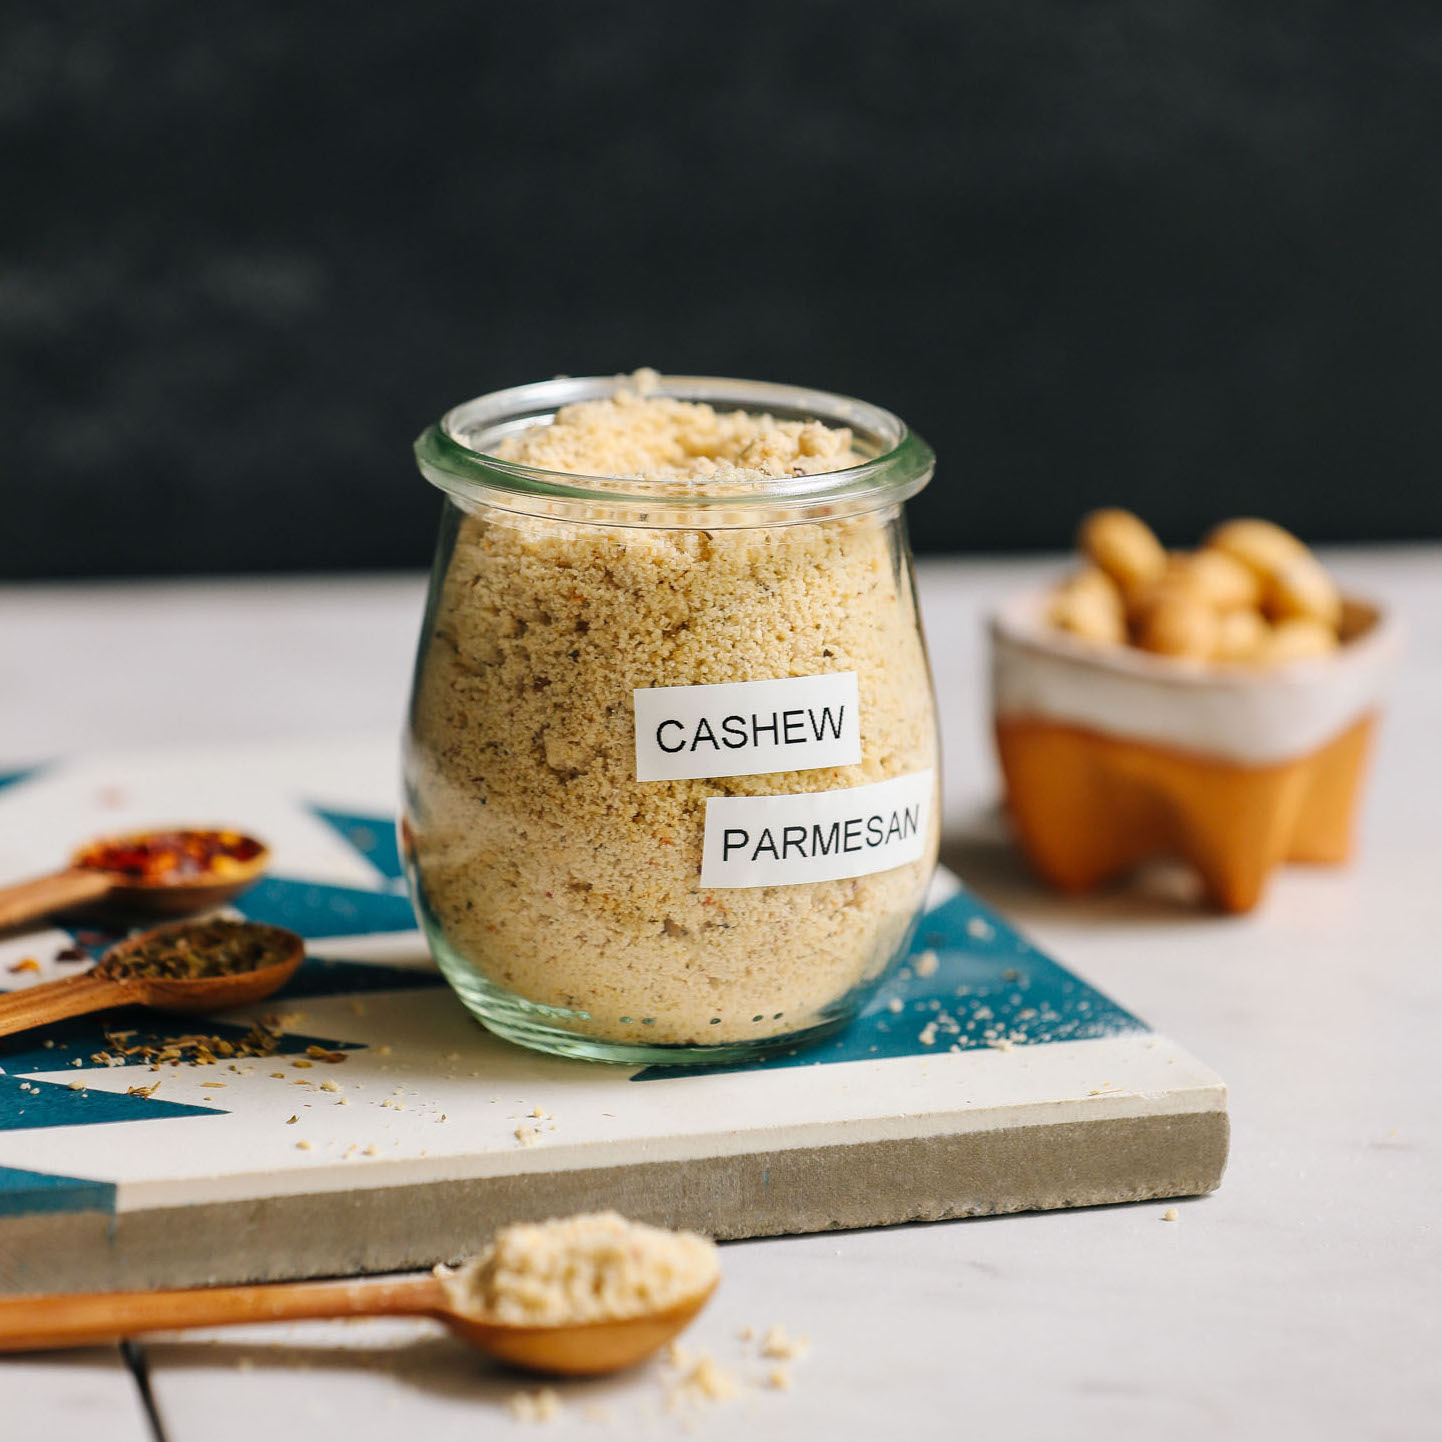 Jar of yeast-free Vegan Parmesan Cheese beside cashews and spices to make it